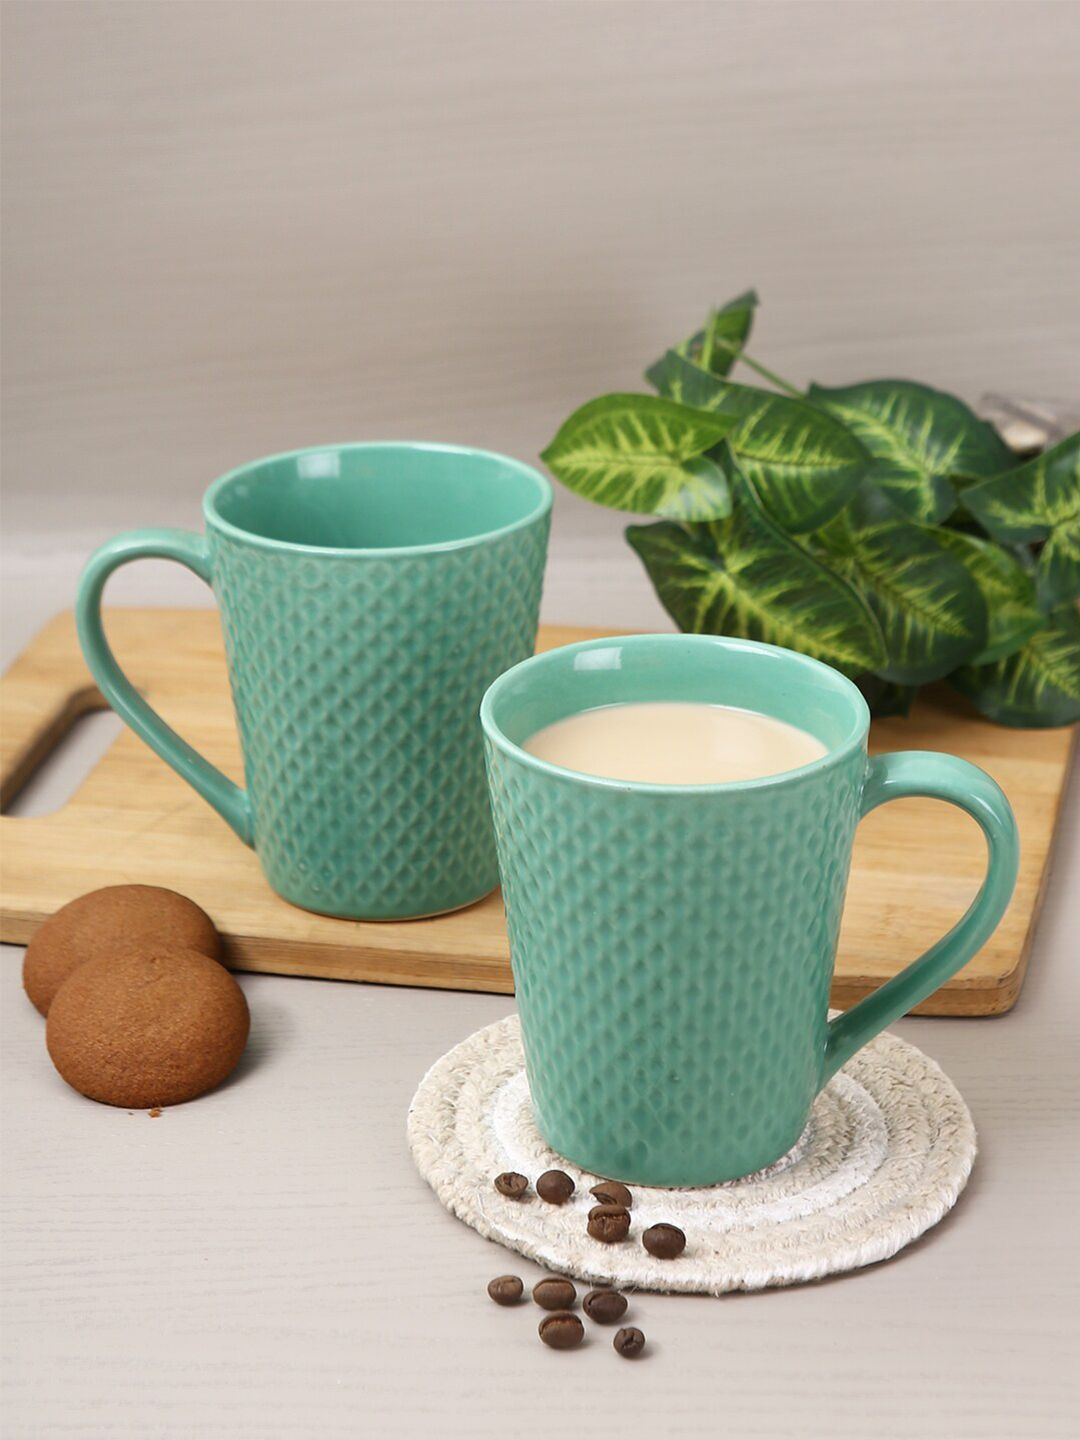 Aapno Rajasthan Sea Green Textured Ceramic Glossy Mugs Set of Cups and Mugs Price in India